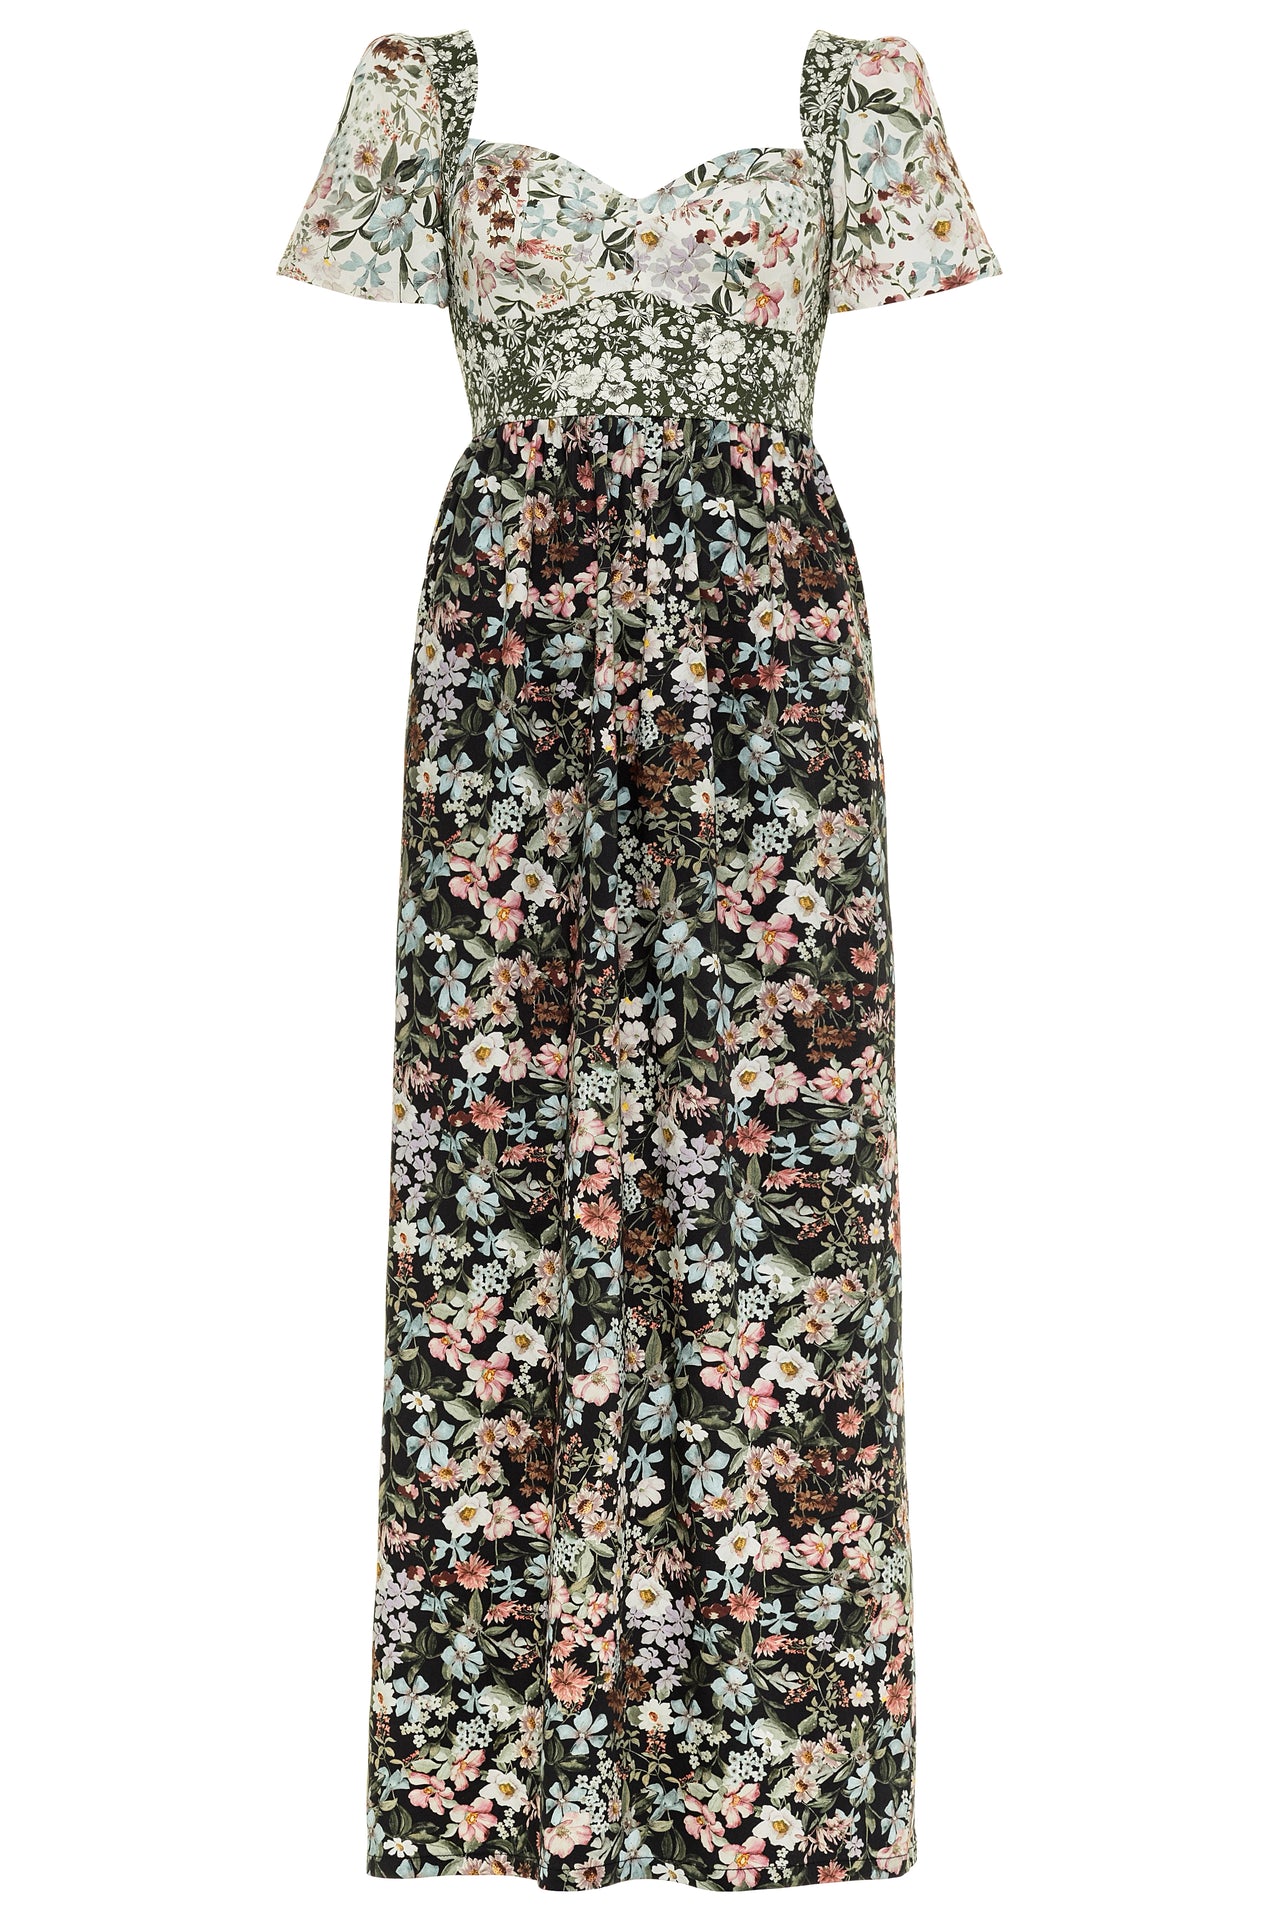 Poppy Maxi Dress with a Sweetheart Neckline and Sculpted Bodice / Mixed Floral Cotton